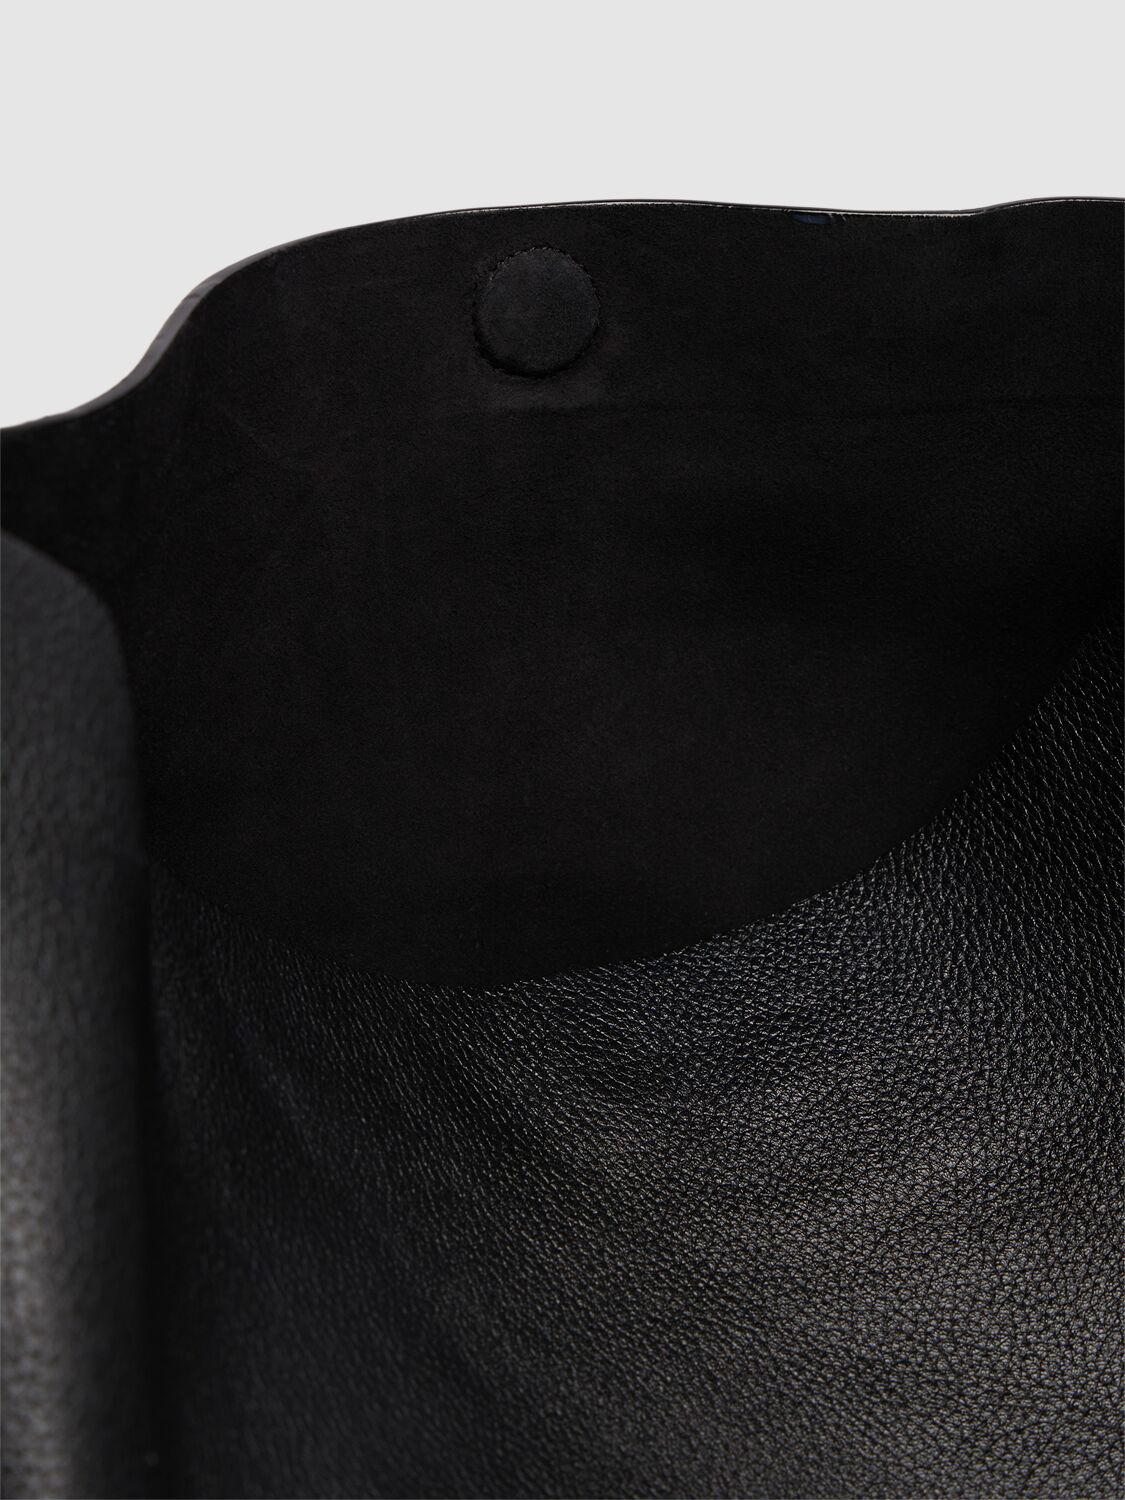 Shop St.agni Minimal Everyday Leather Tote Bag In Black